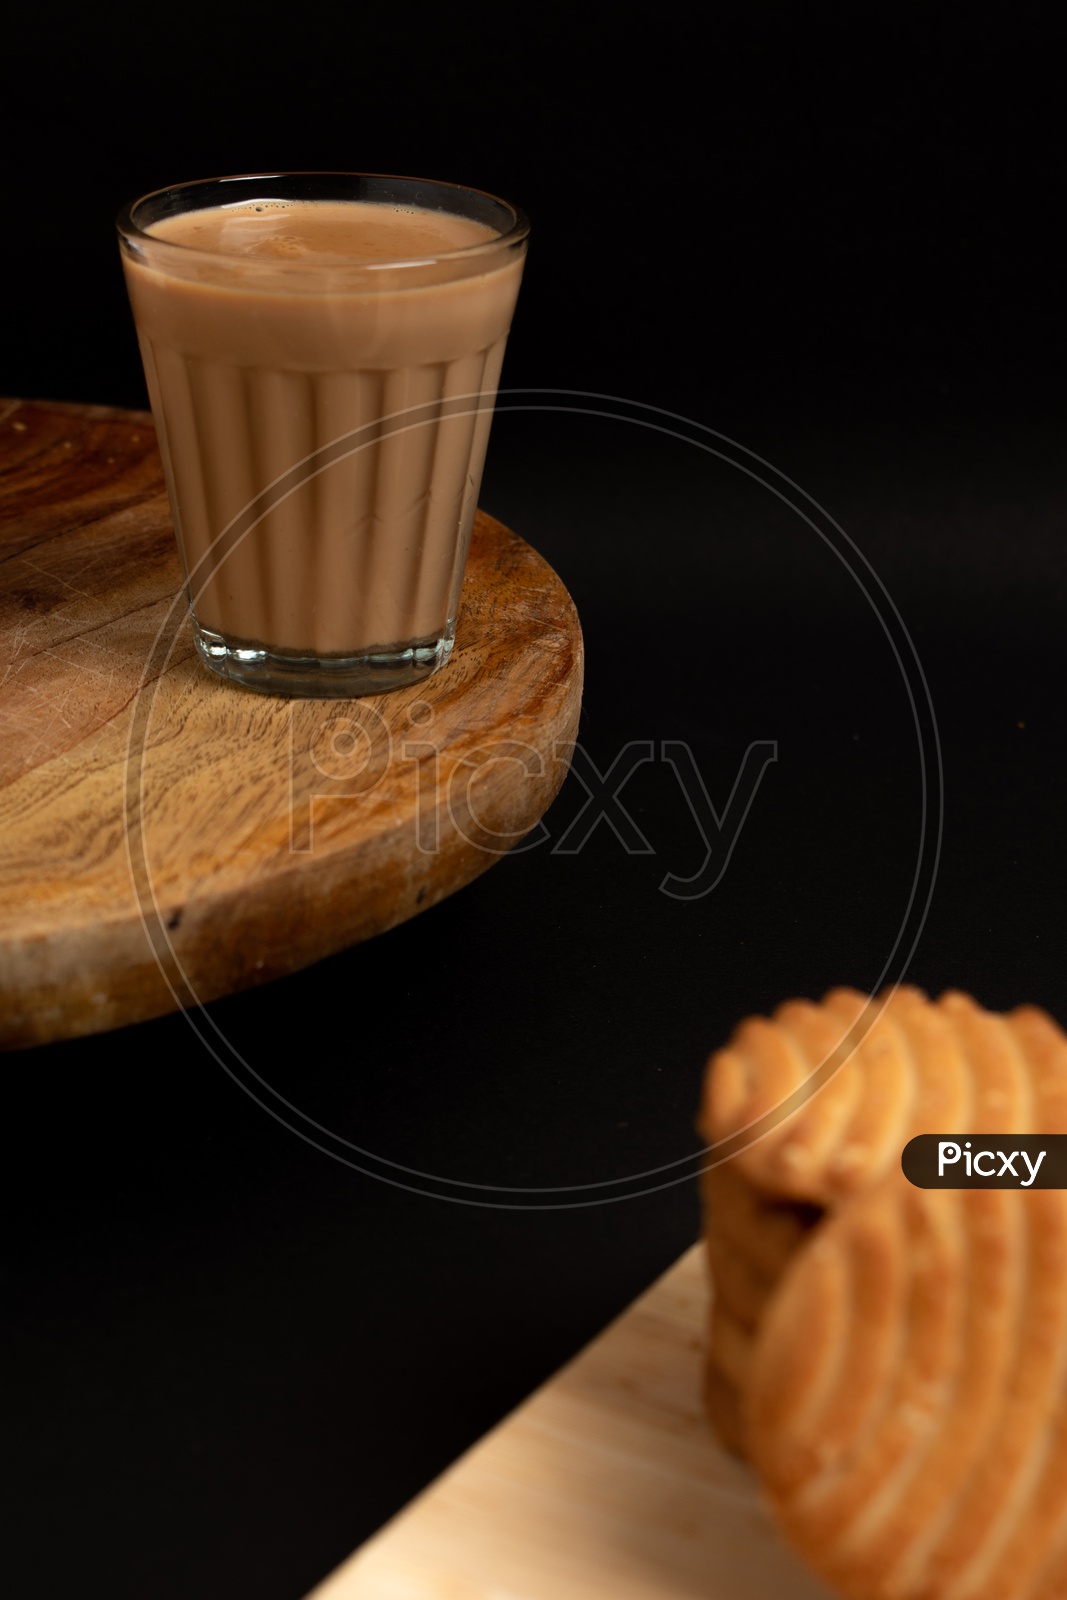 Aromatic beverage  Tea/chai   with Good-day biscuits placed on wooden plates on a black background.